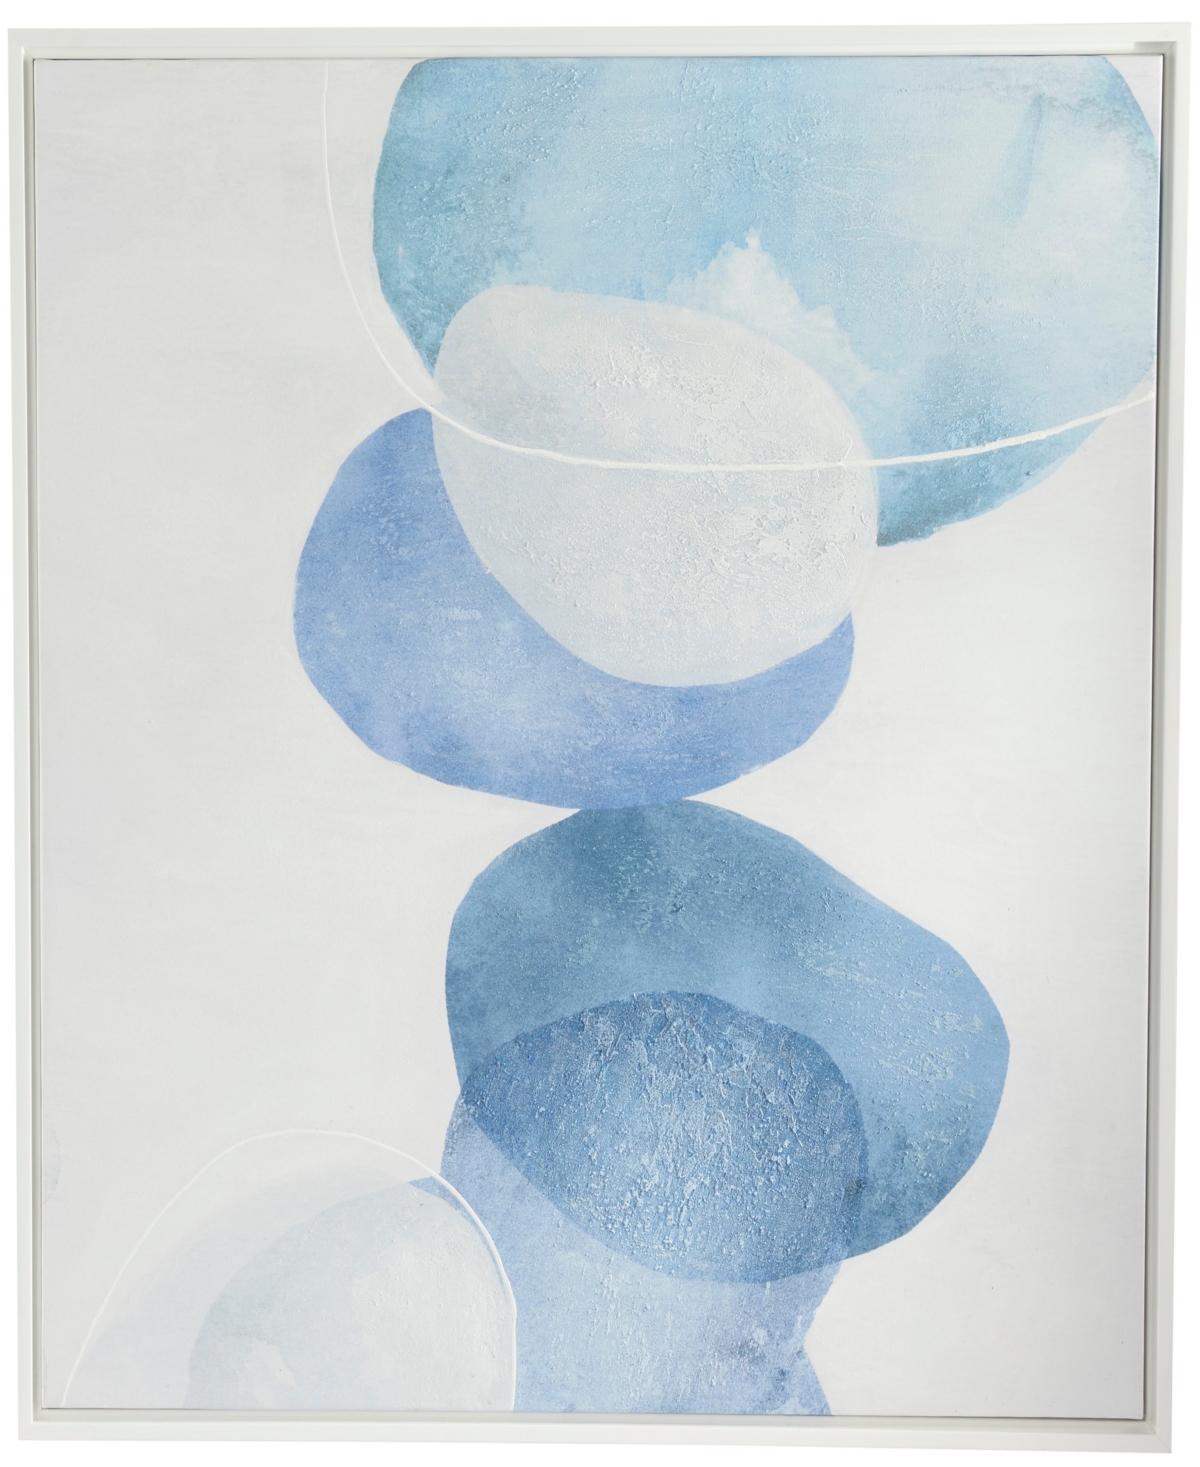 Rosemary Lane Canvas Overlapping Circle Abstract Framed Wall Art With White Frame, 37" X 1" X 37" In Blue